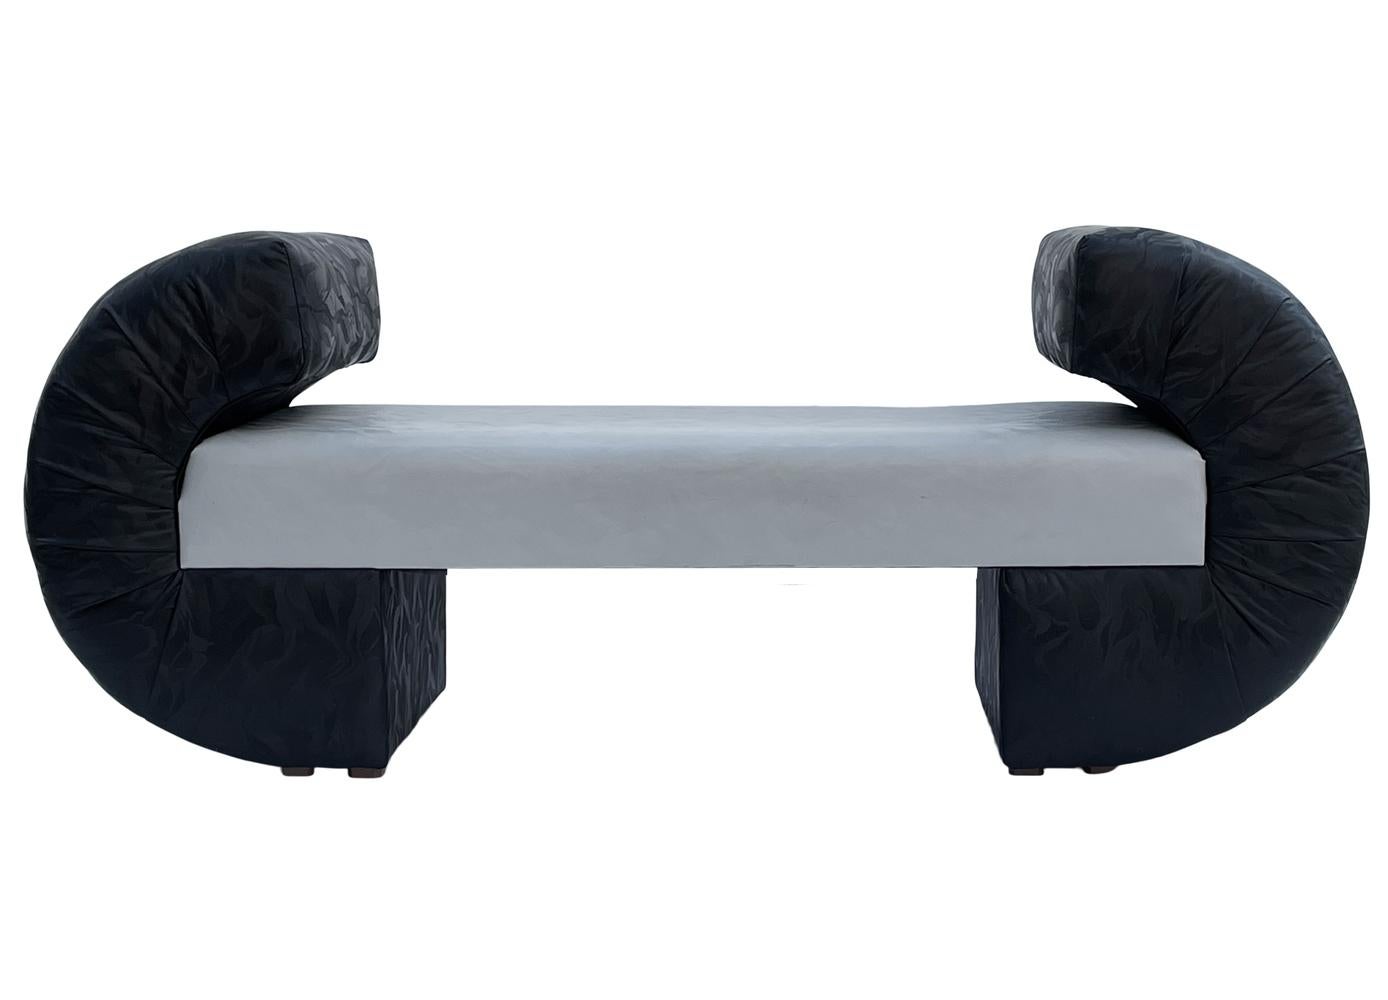 Late 20th Century Mid Century Italian Post Modern Sculptural Bench or Settee in Black & Grey For Sale